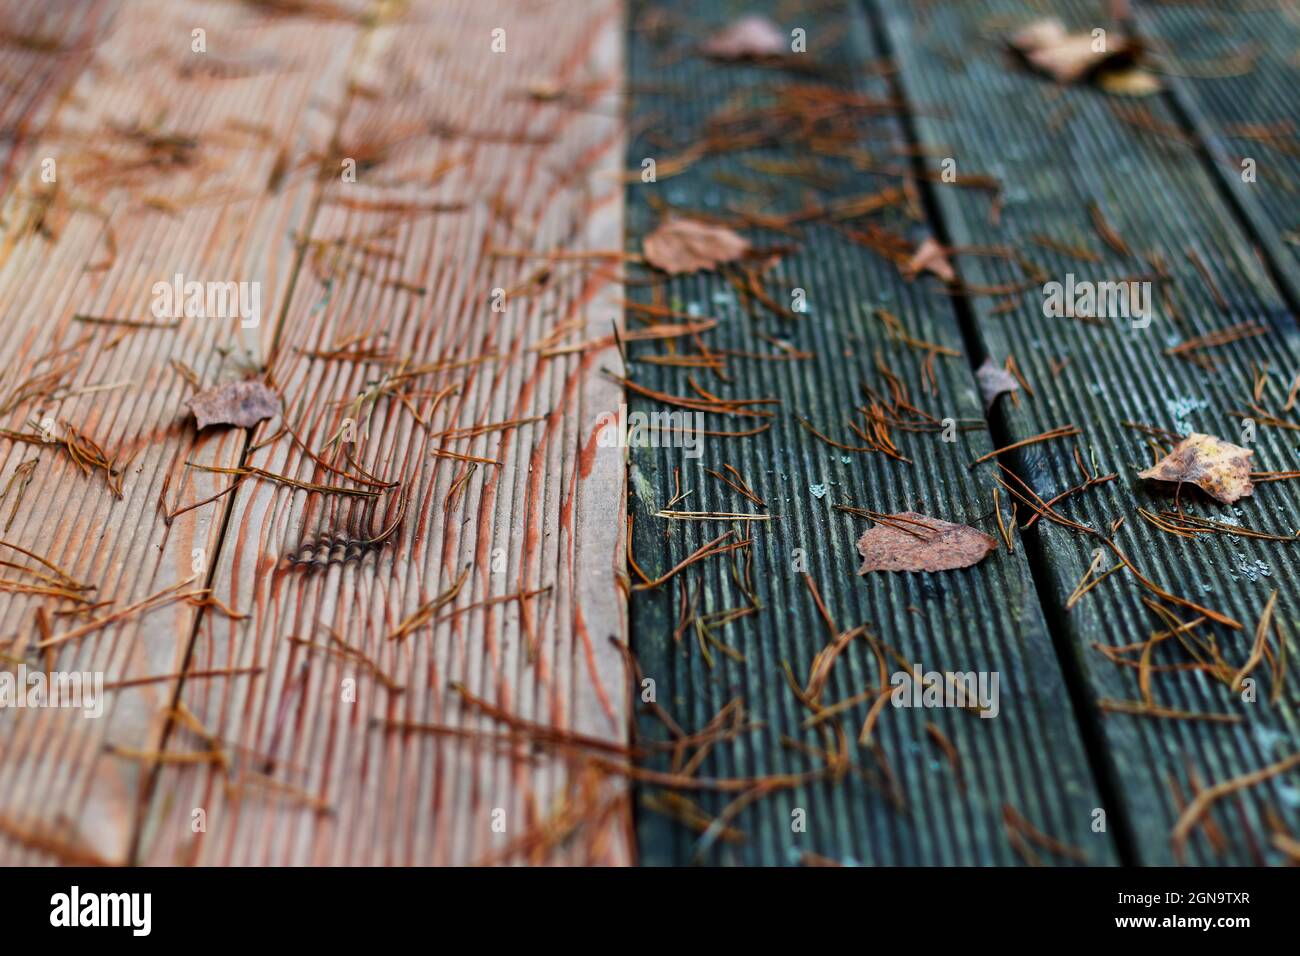 Defocus wooden brown and black textured background with fallen pine needle and dry leaves. Autumn abstract background. Forest outdoor. Out of focus Stock Photo